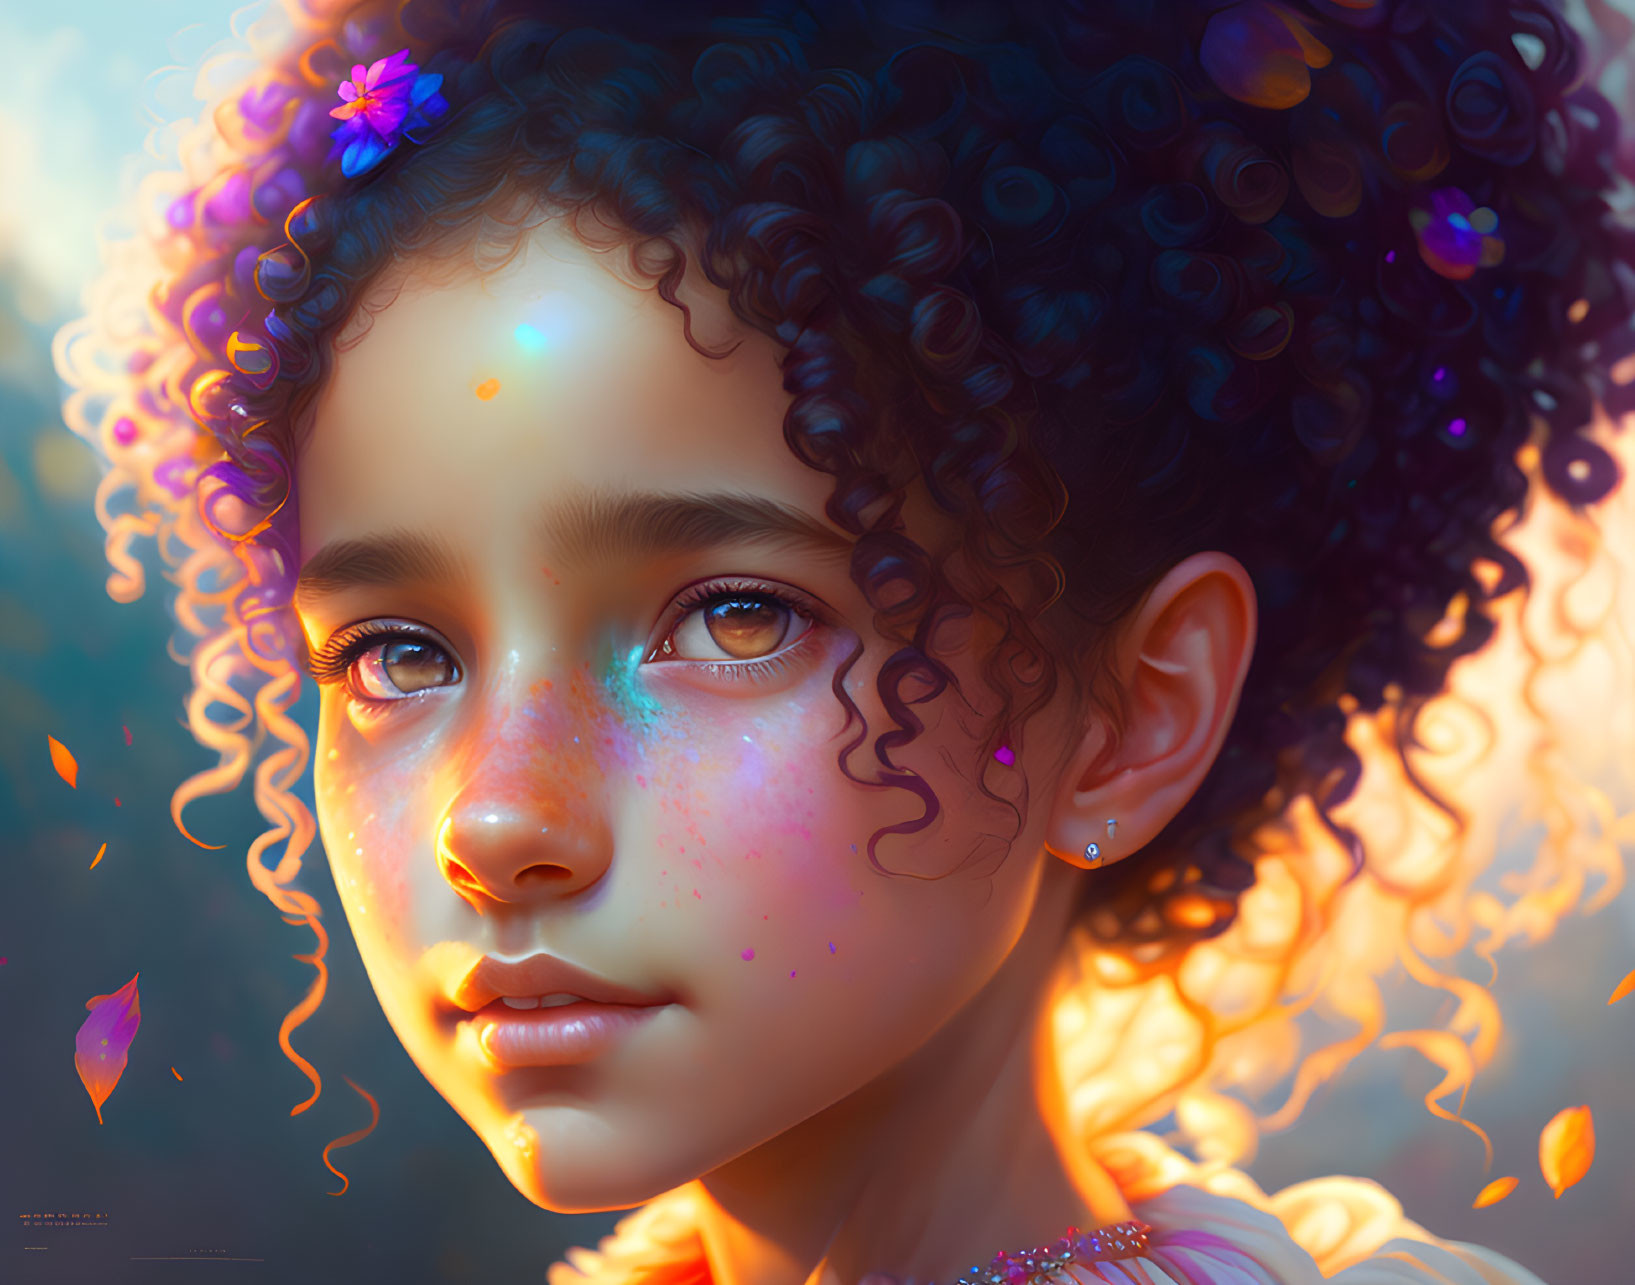 Digital artwork featuring girl with curly hair, sunlight, sparkles, and leaves.